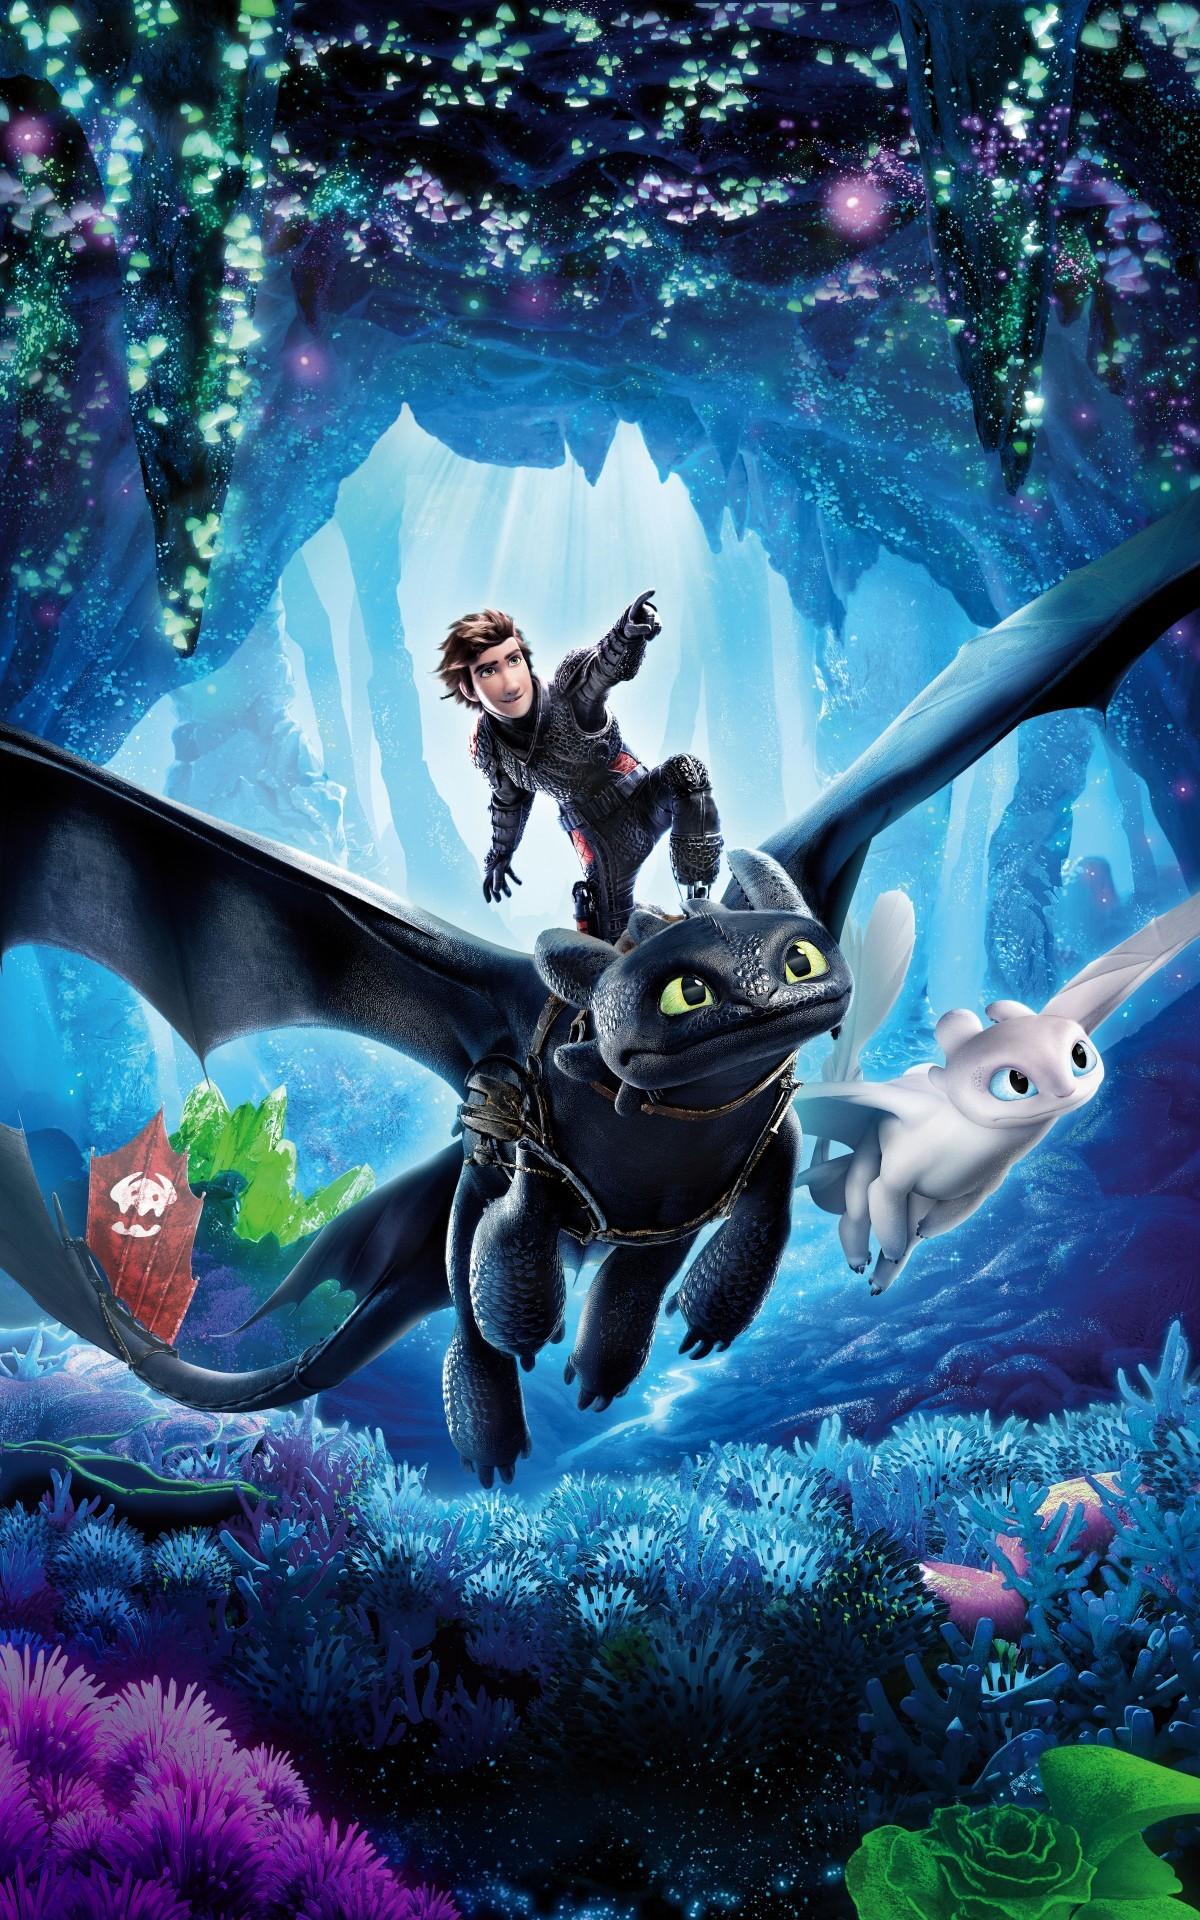 Download 1200x1920 How To Train Your Dragon: The Hidden